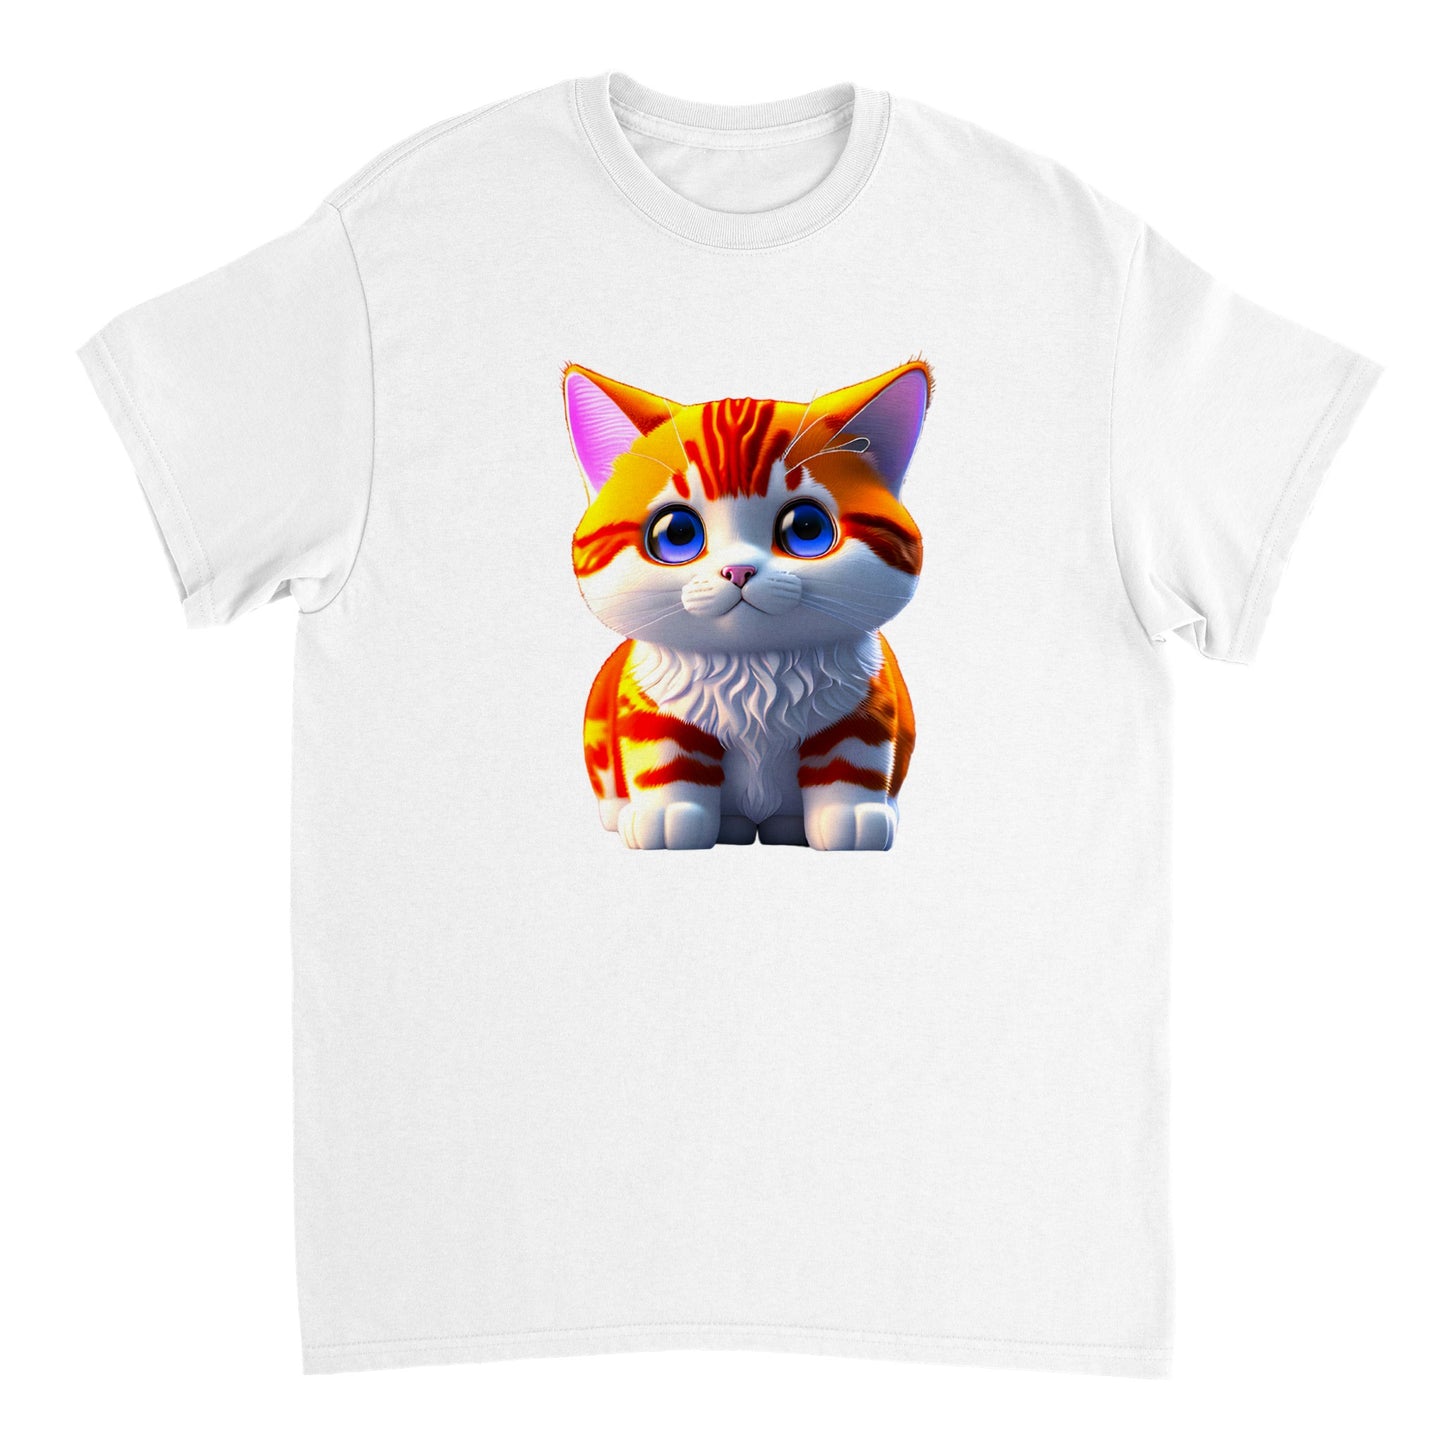 Adorable, Cool, Cute Cats and Kittens Toy - Heavyweight Unisex Crewneck T-shirt 31